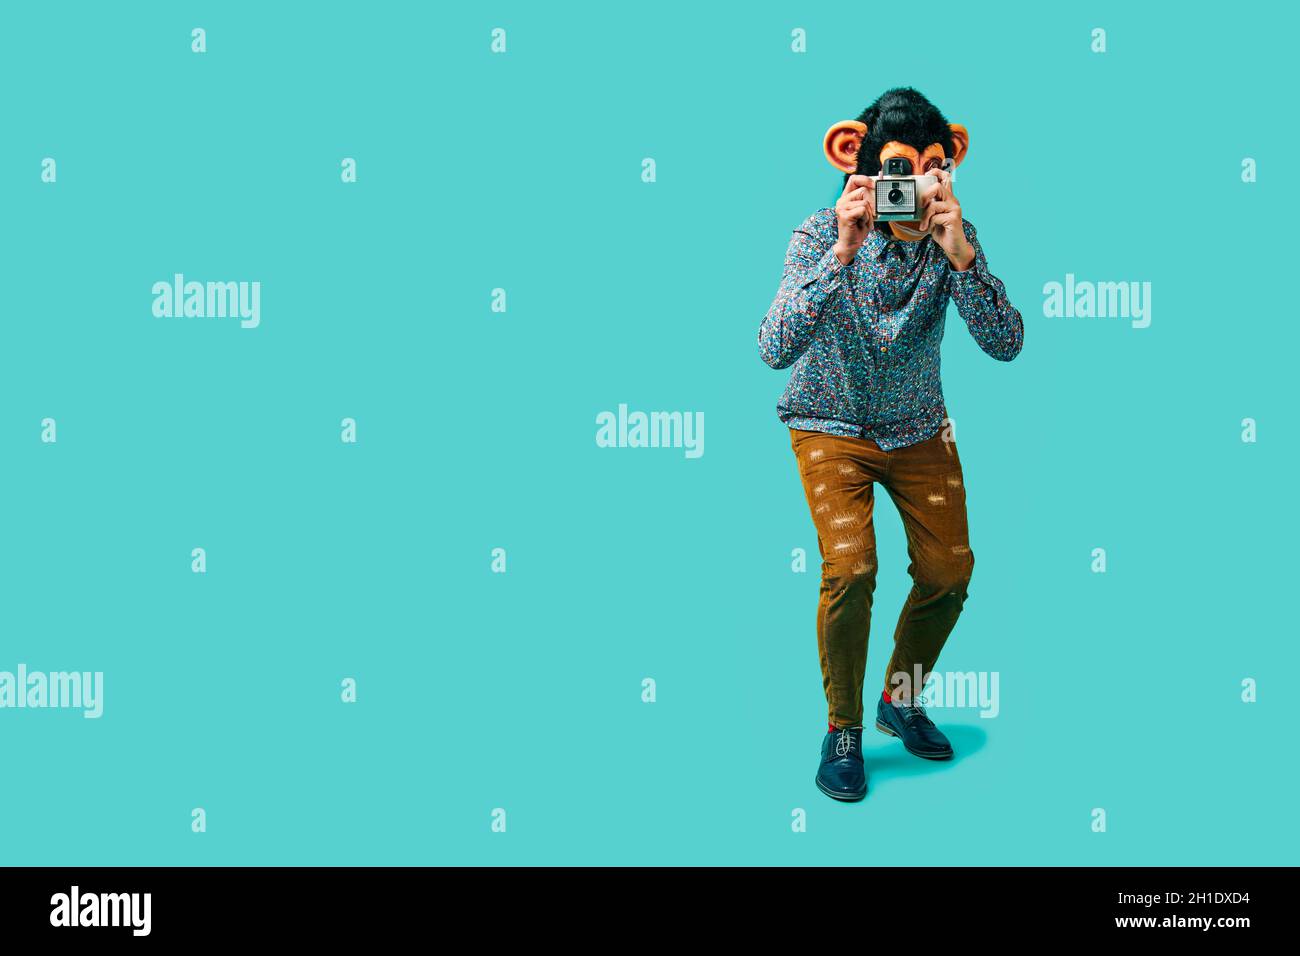 a young man, wearing a monkey mask, takes a picture with a retro instant camera, standing on a blue background with some blank space on the left Stock Photo